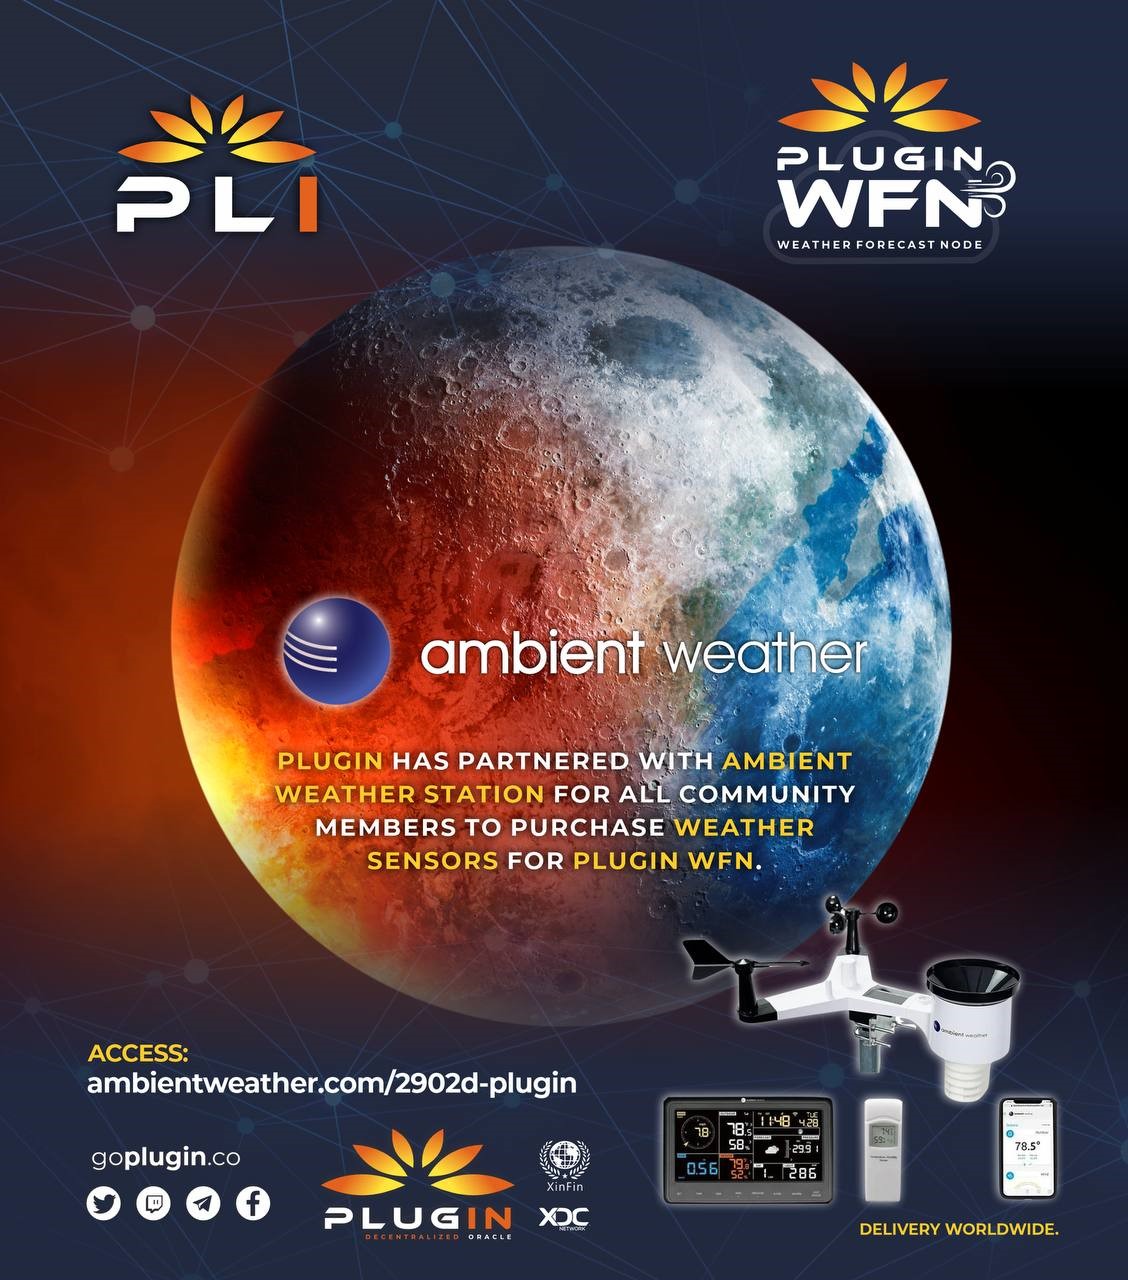 An Insight in Plugin & Ambient Weather's Partnership To Understand Climate Change